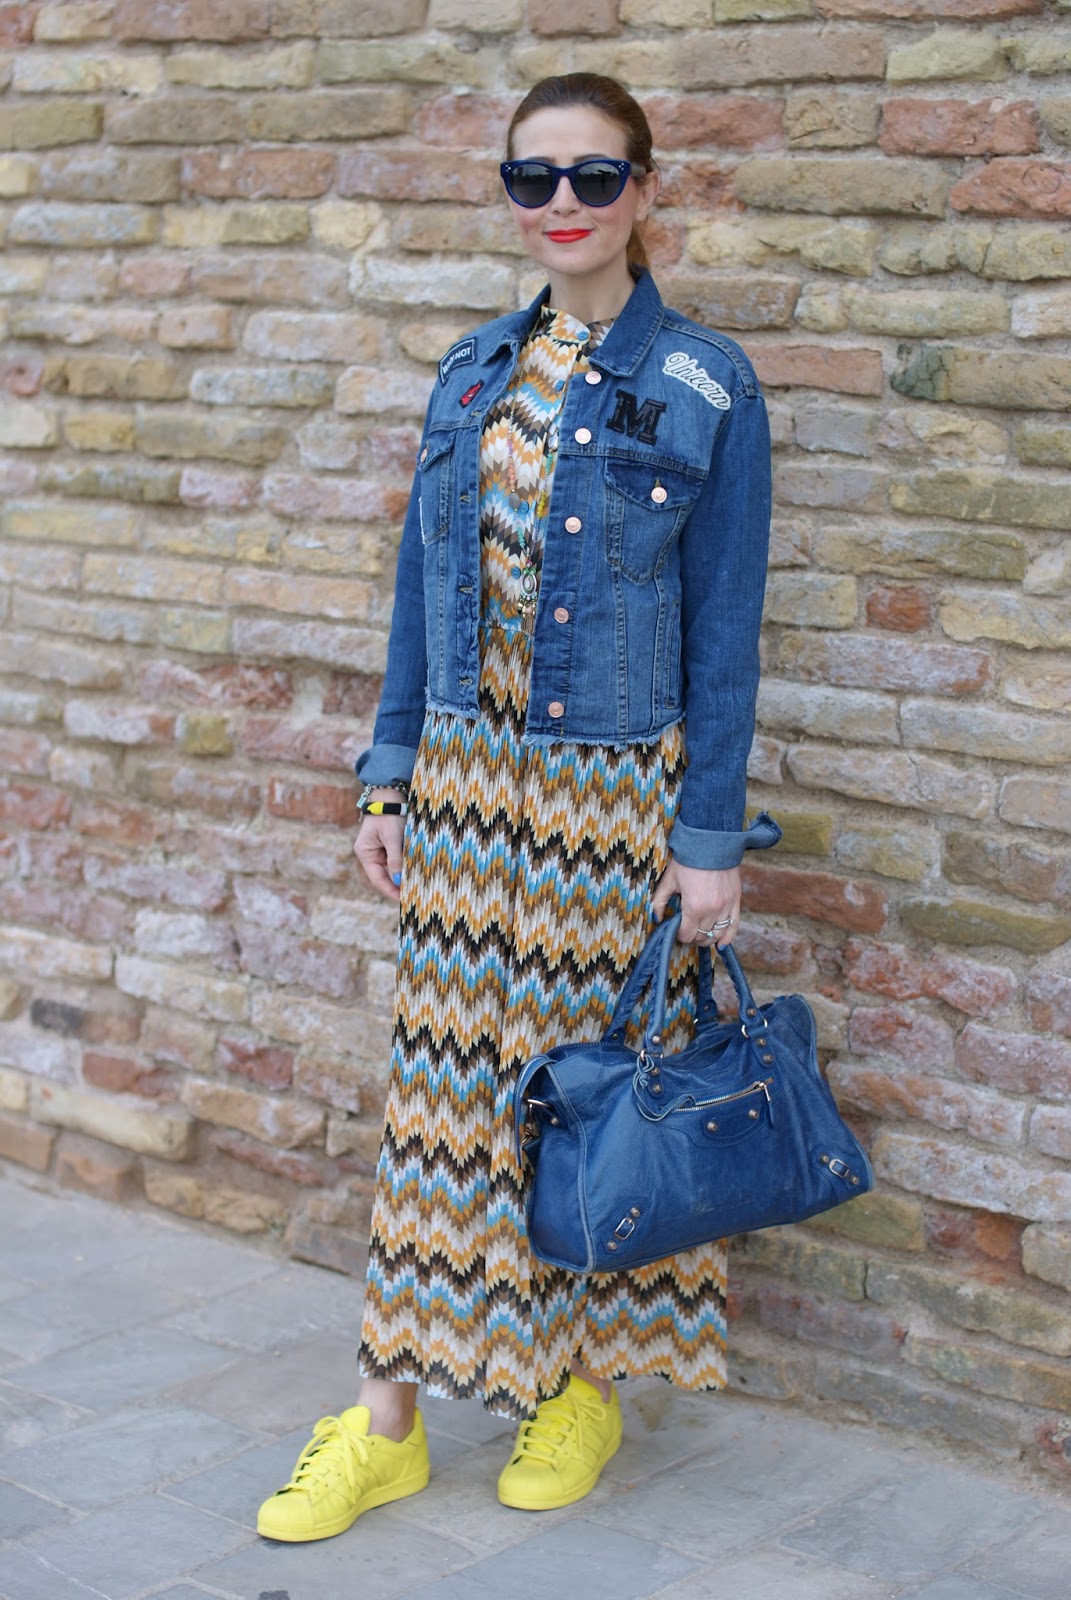 Pleated maxi dress and denim patched jacket on Fashion and Cookies fashion blog, fashion blogger style